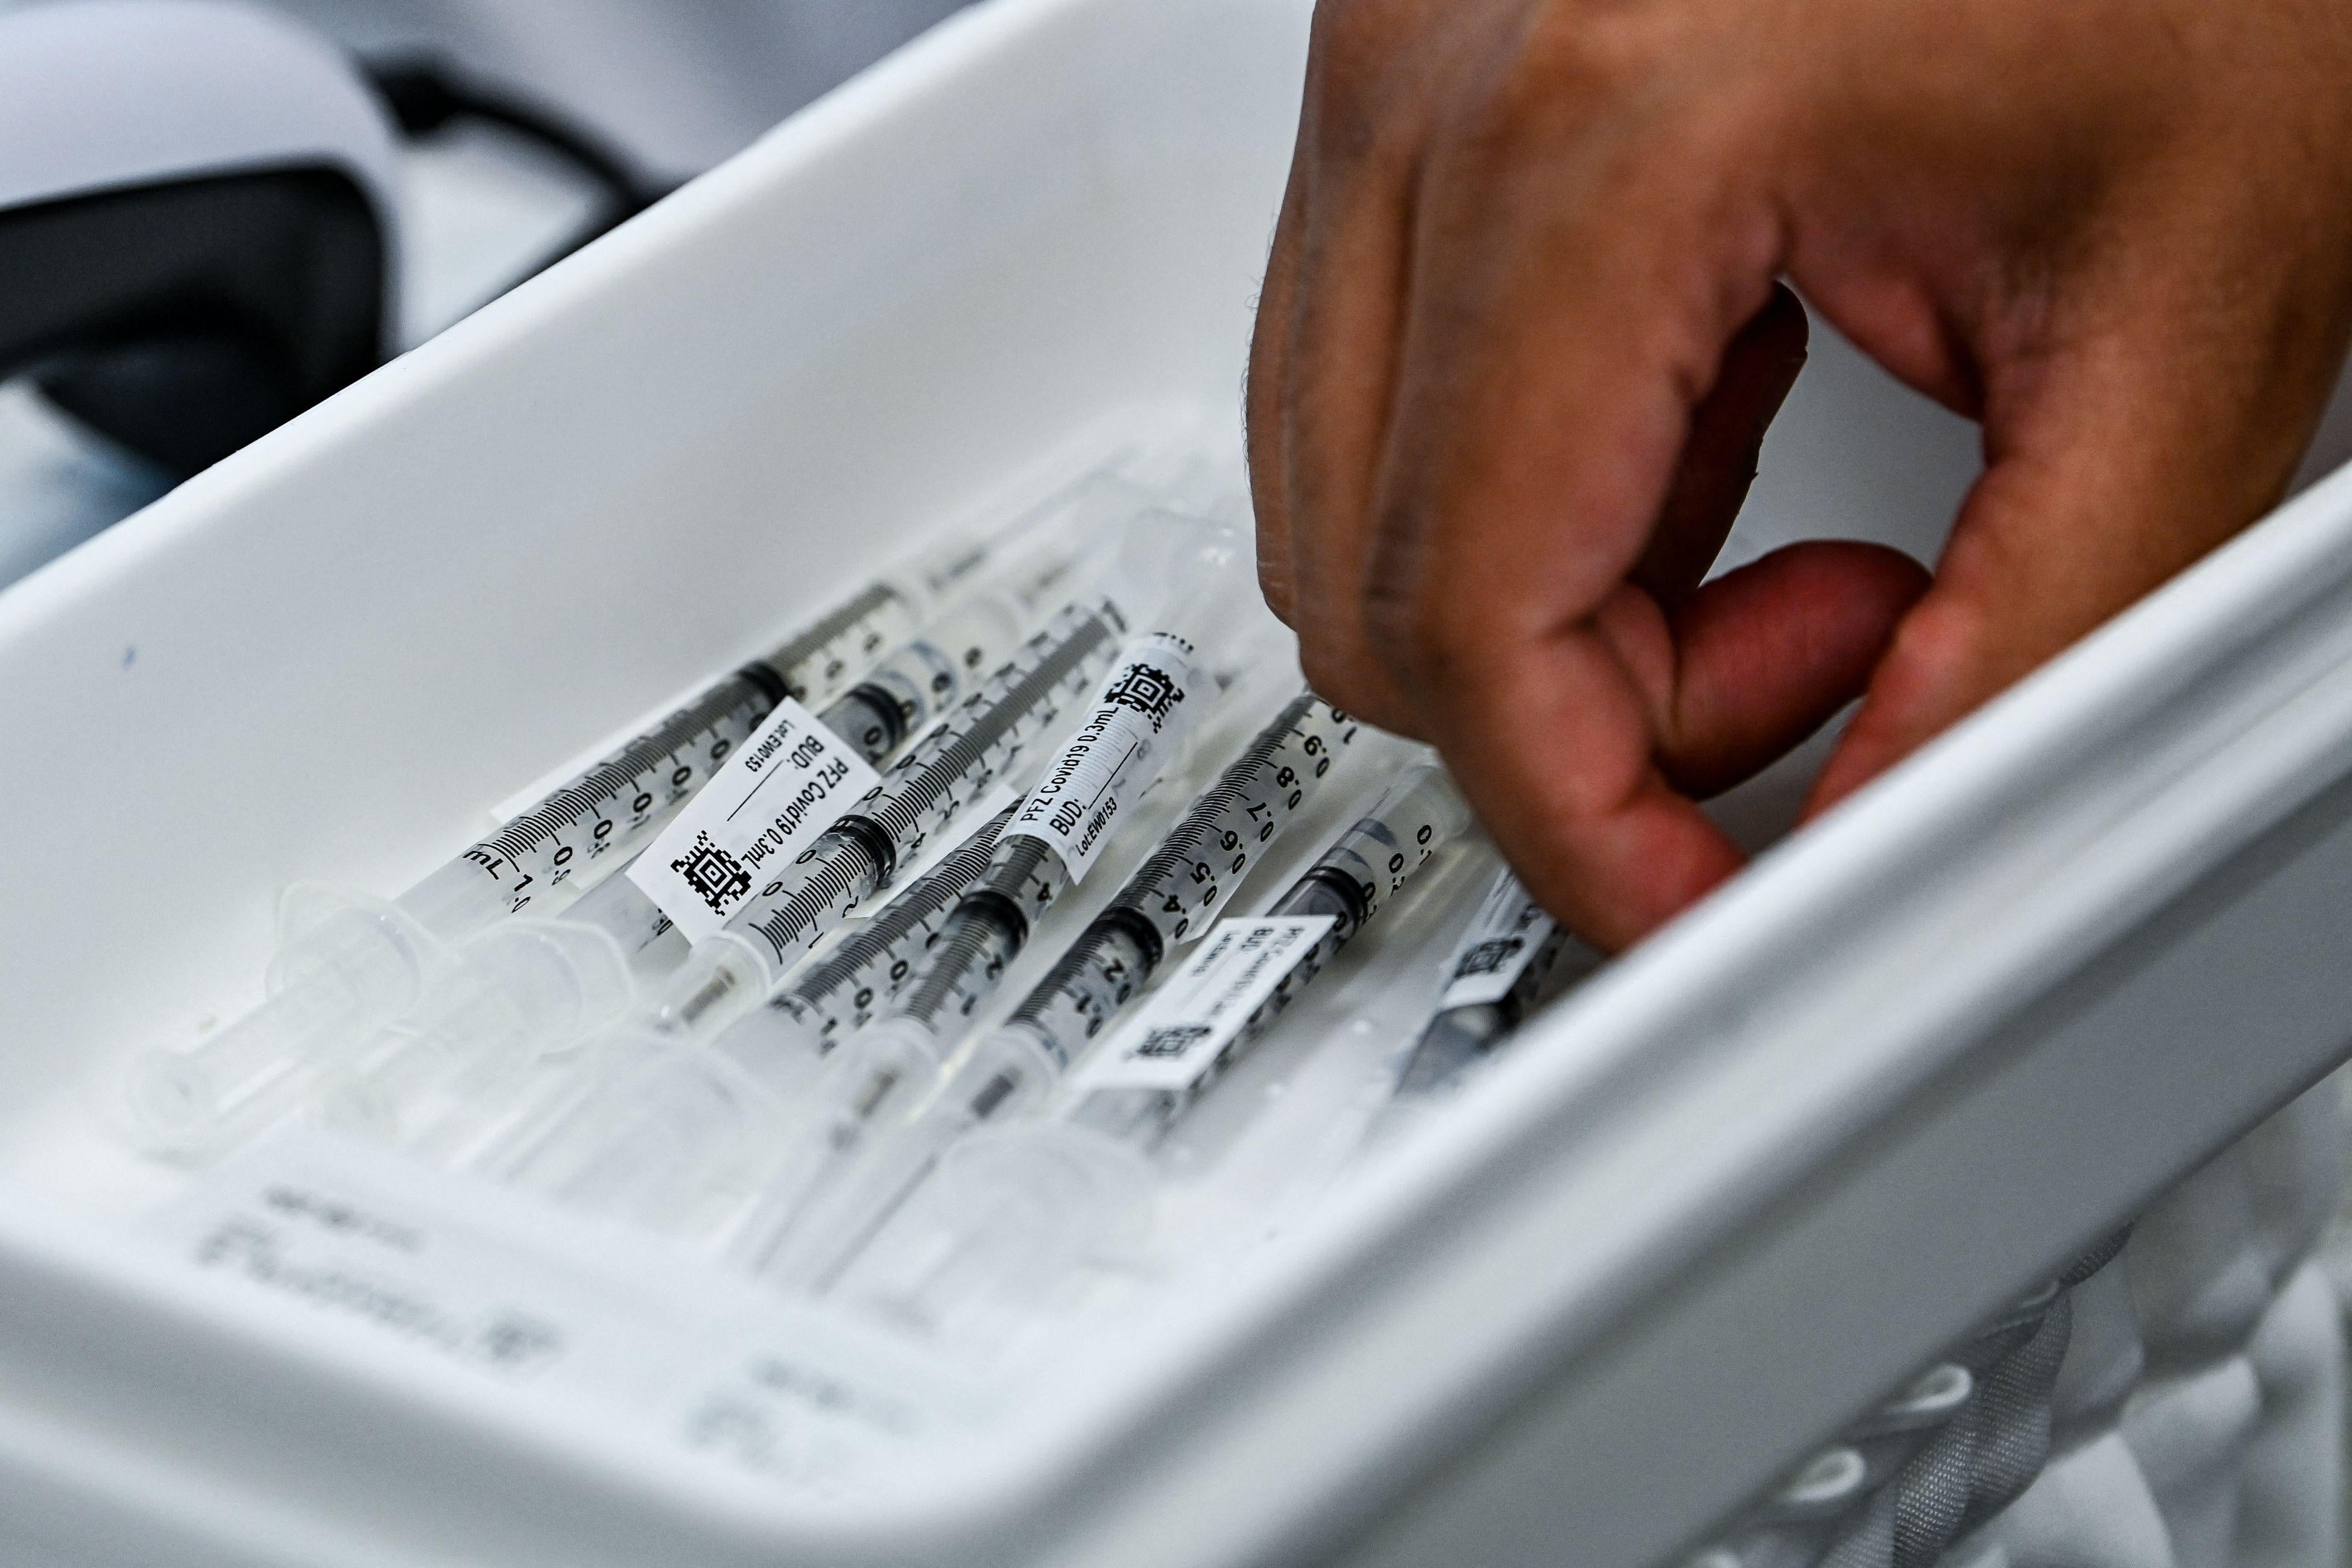 A hand reaches into a bin of vaccine syringes.